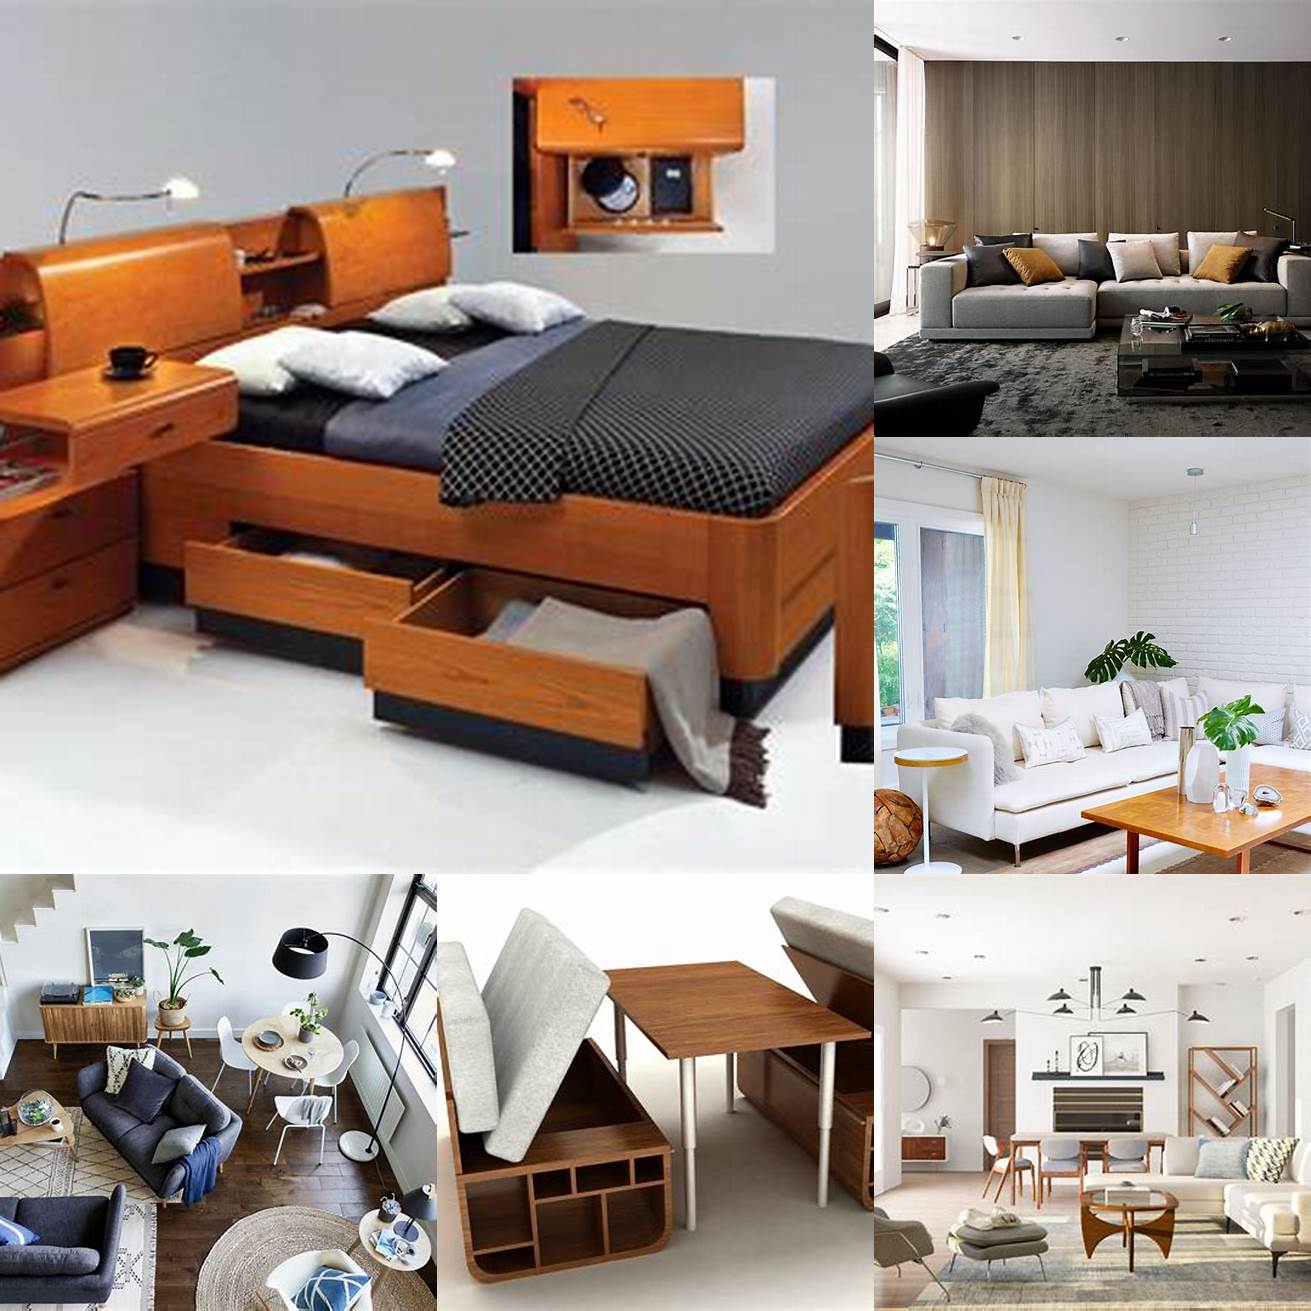 Consider the functionality and practicality of the furniture